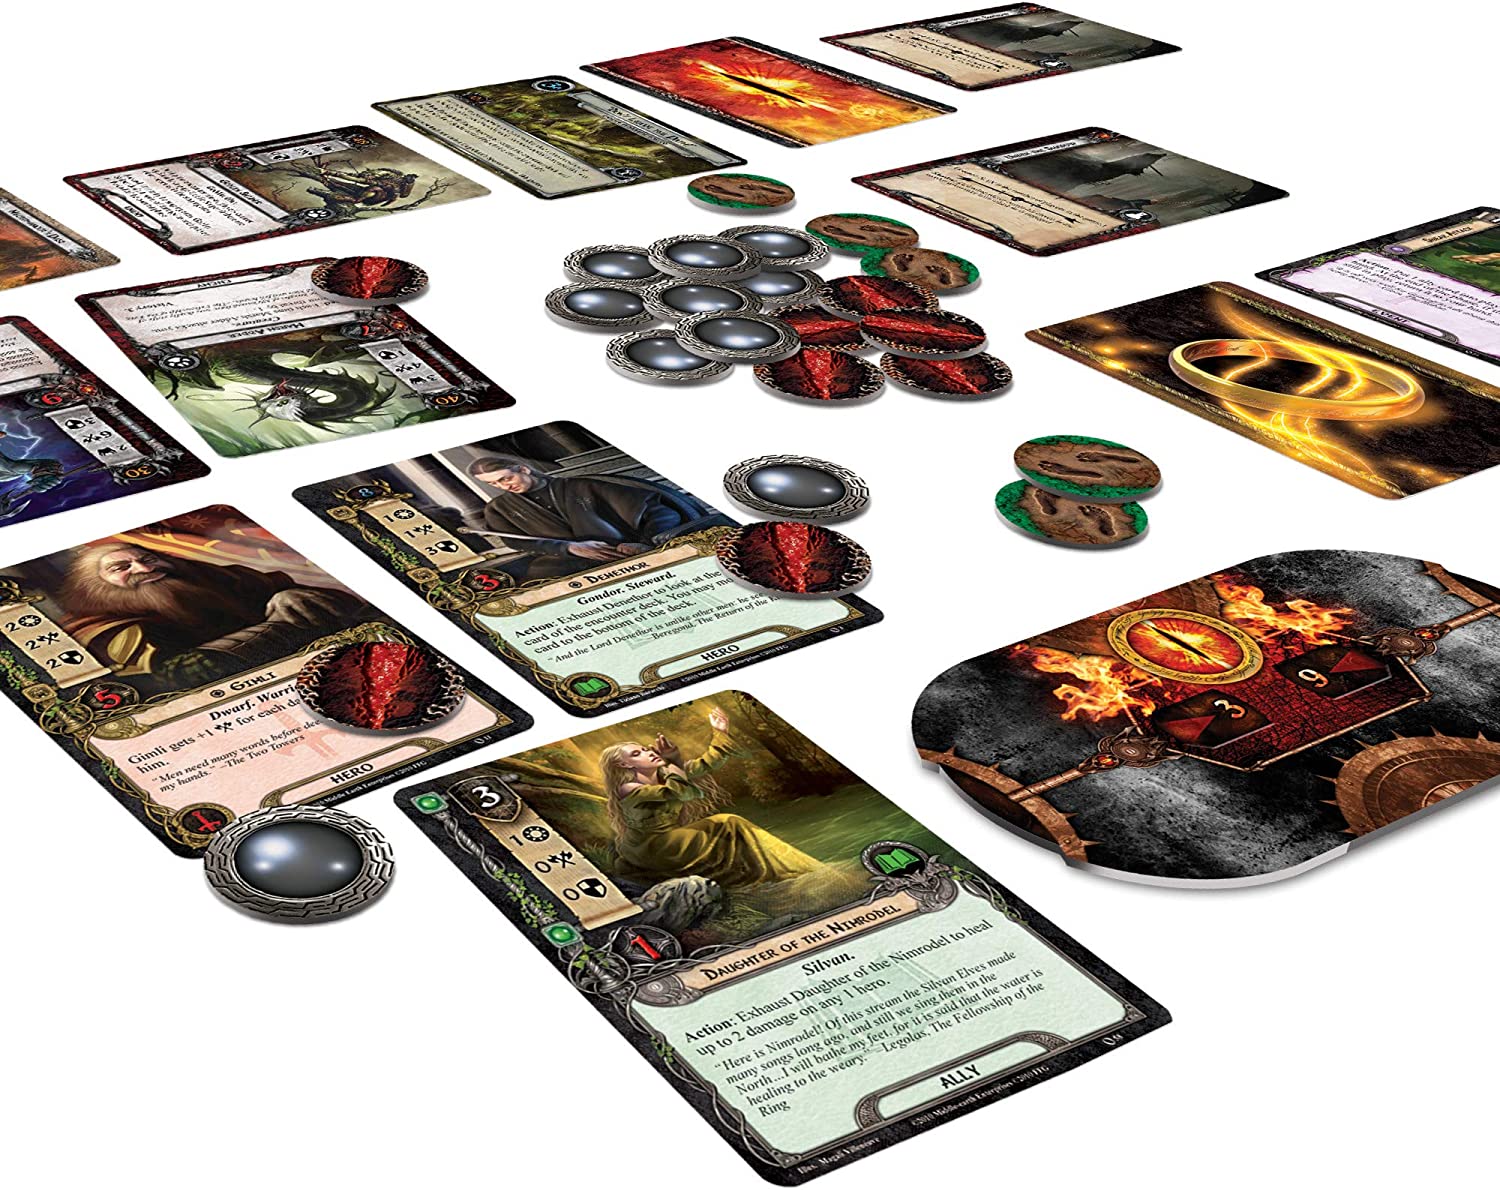 The Lord of the Rings: The Card Game – The Fellowship of the Ring